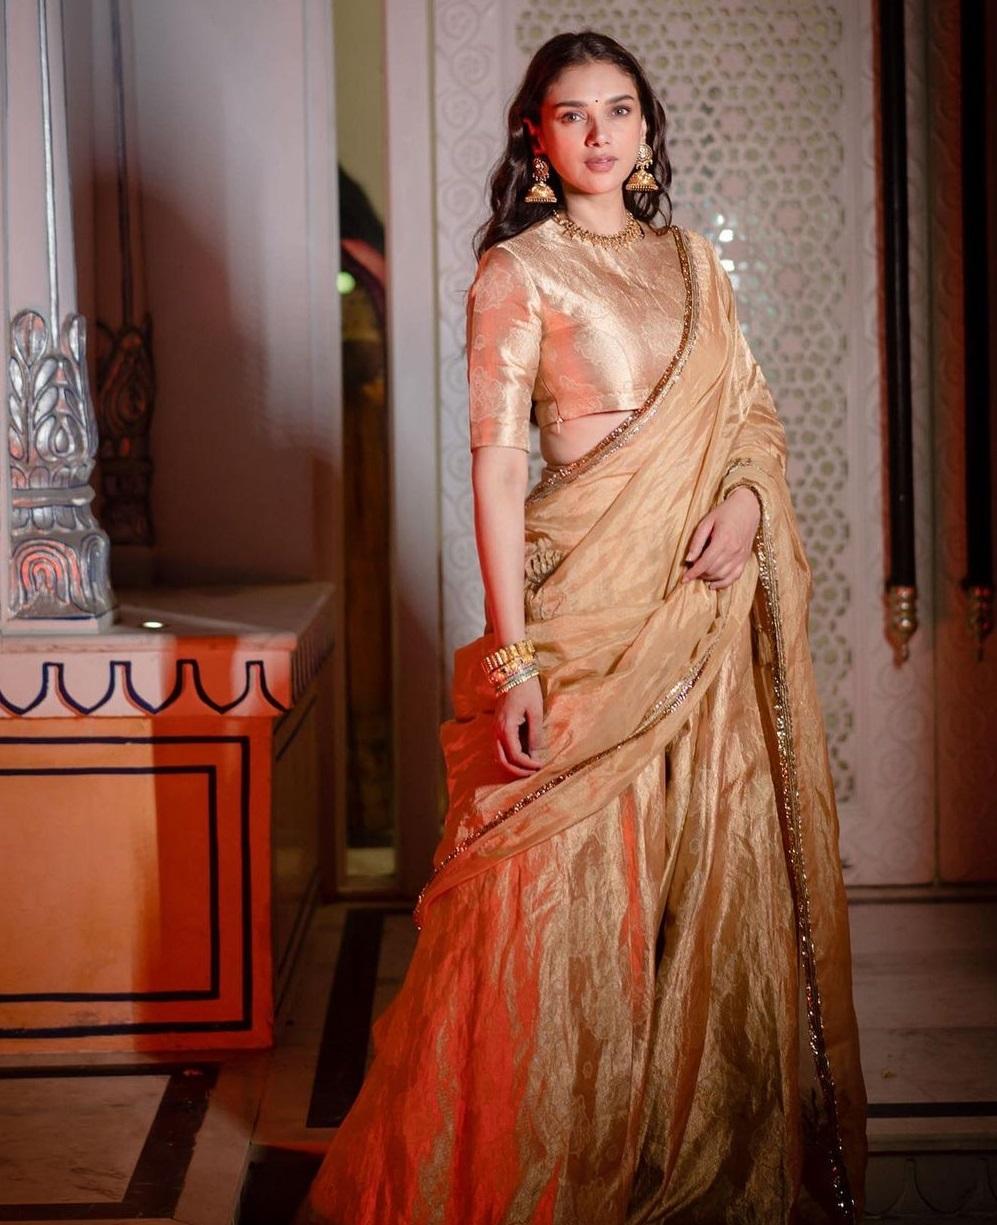 Her ensemble consists of a blouse skirt and matching dupatta with gold silk brocade embroidery.